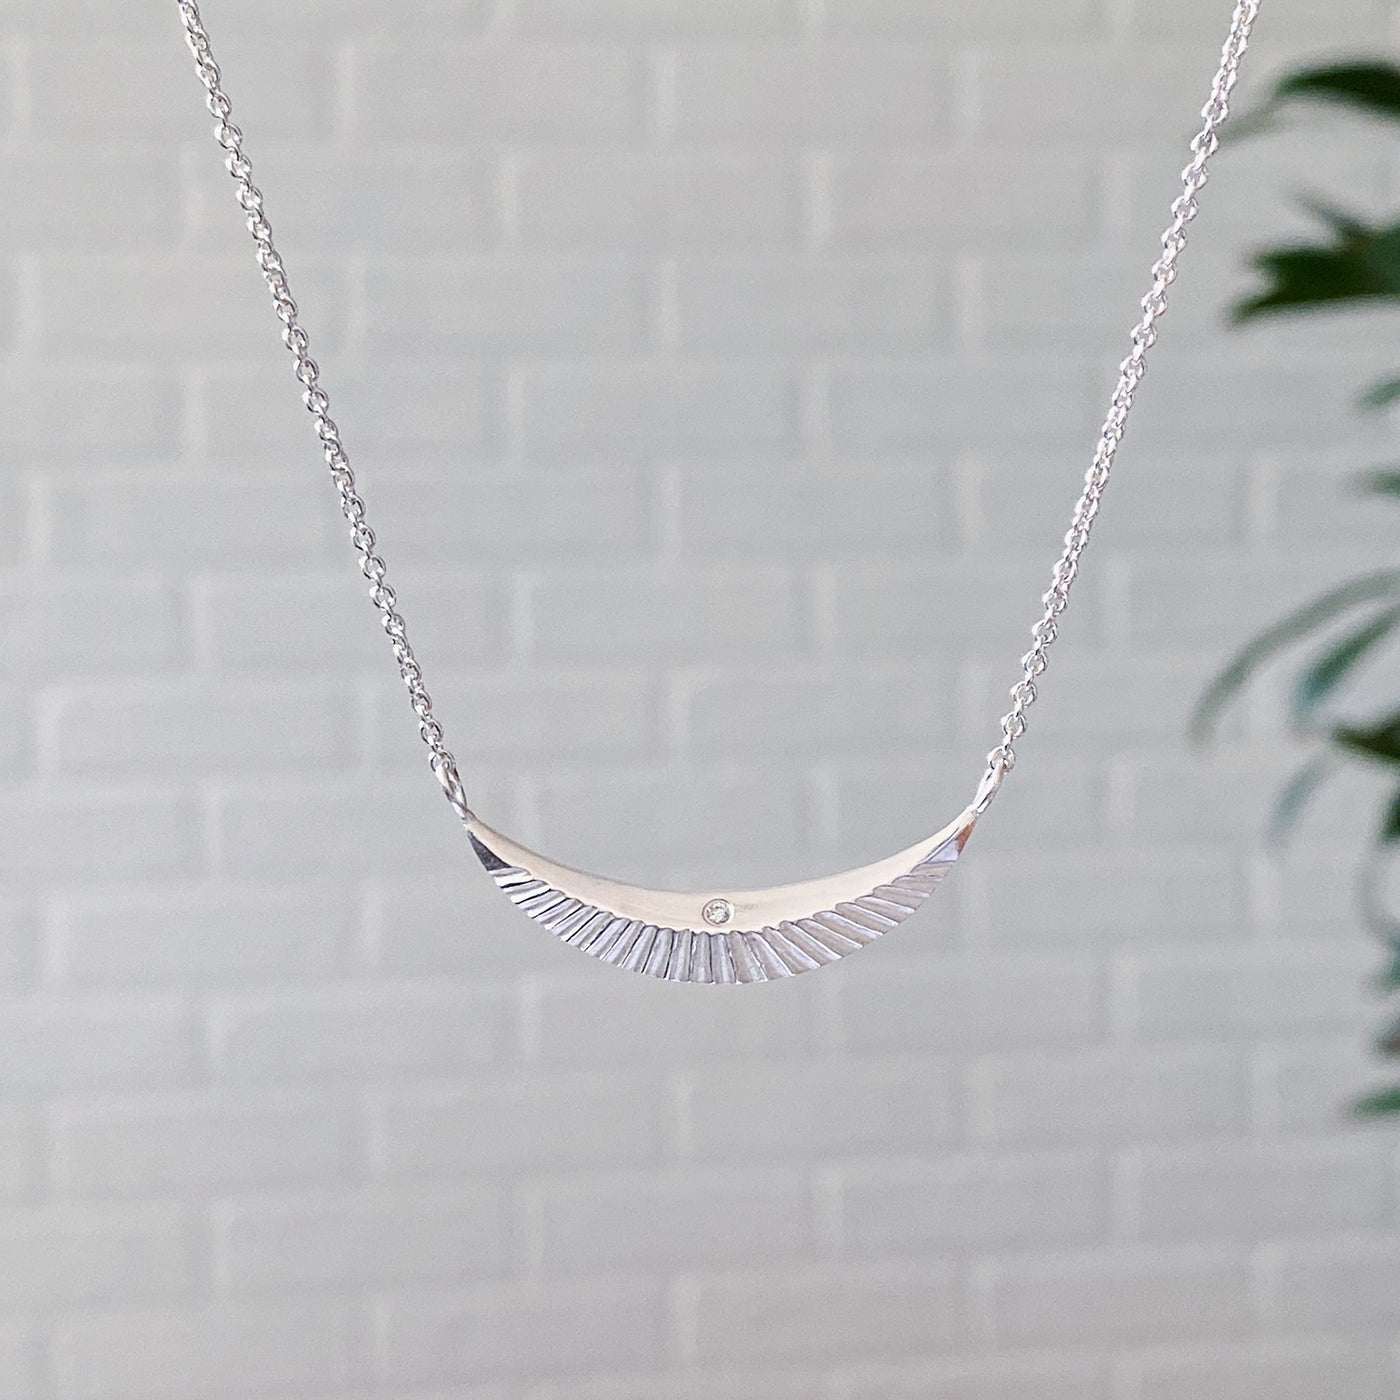 Crescent necklace with carved rays and a single diamond in sterling silver